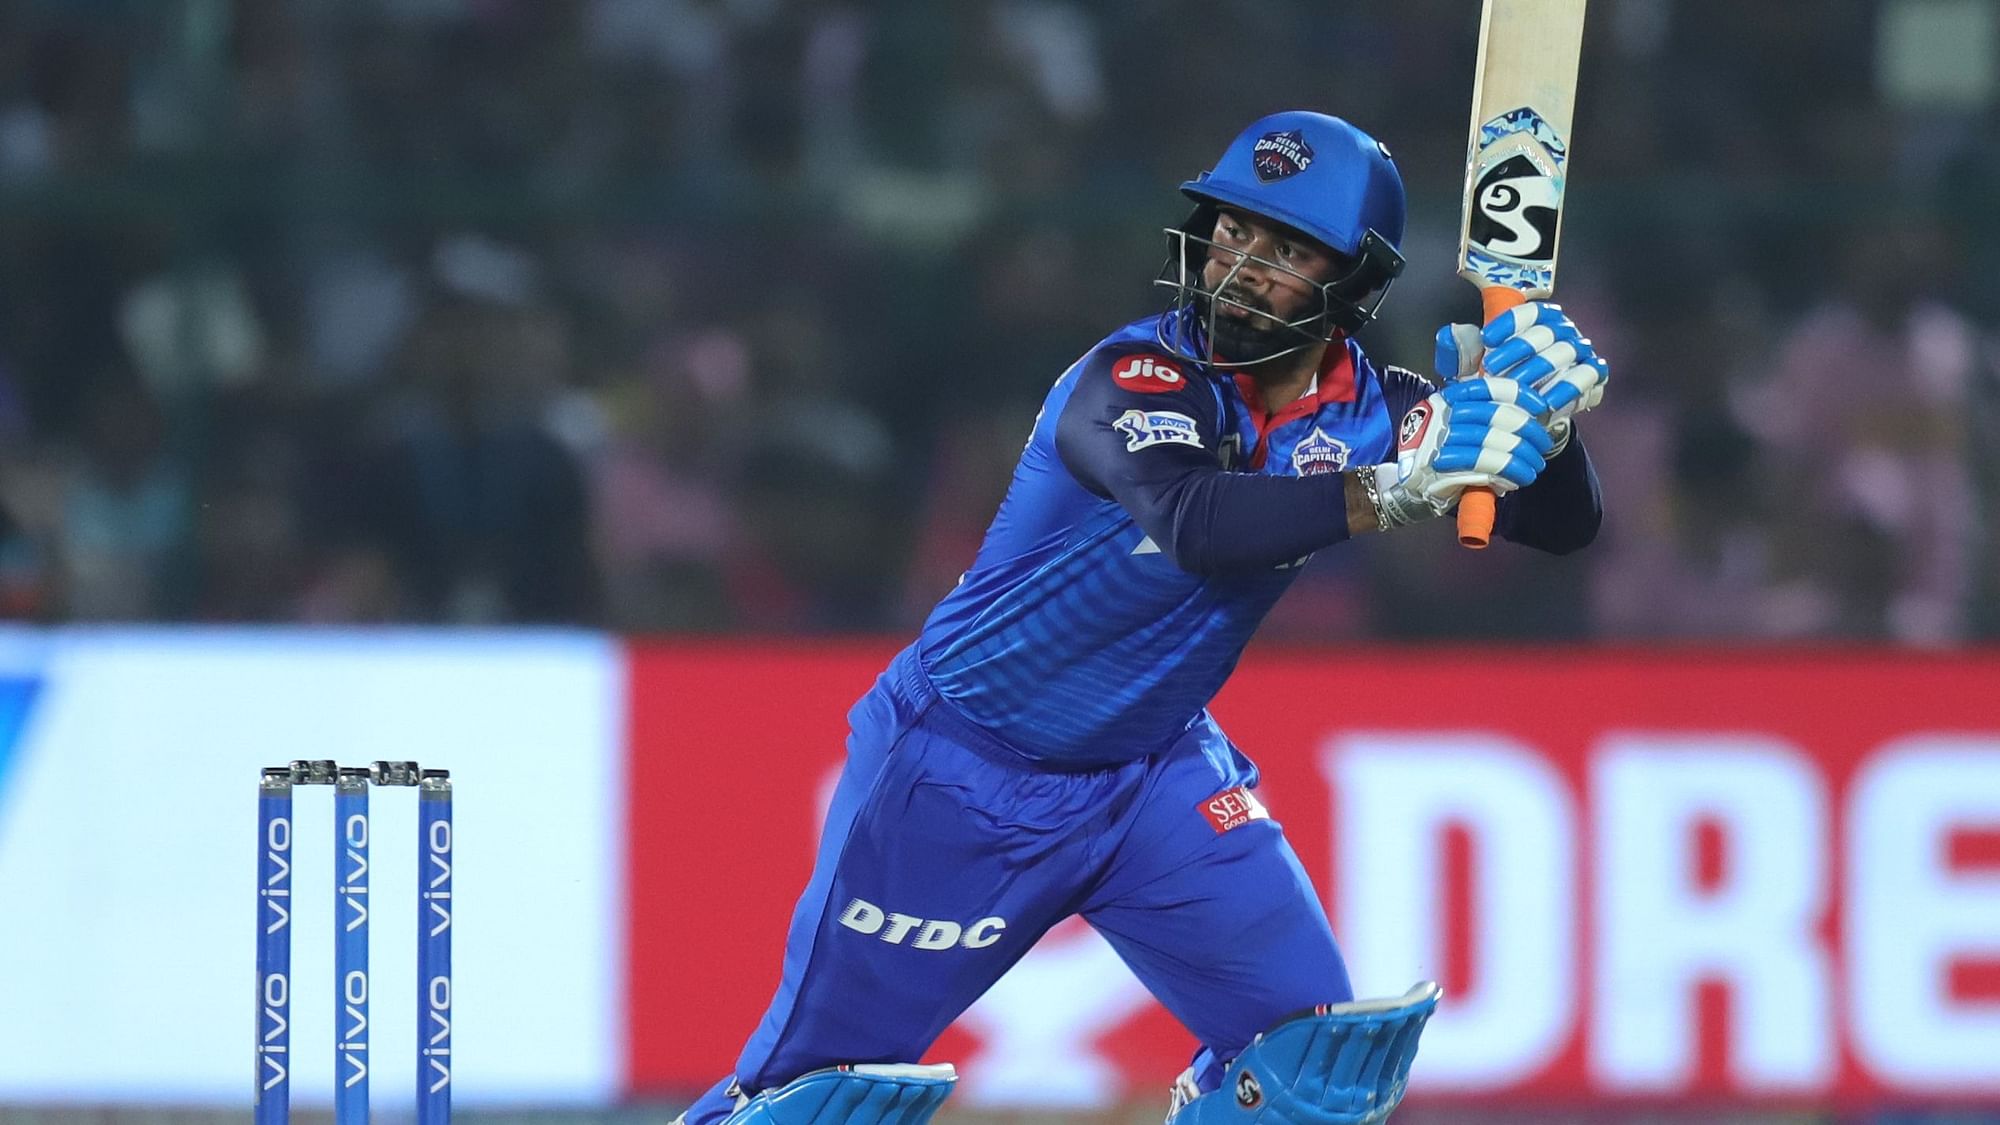 Pant made a statement with a blistering 78 off 36 balls and powered Delhi Capitals to a six-wicket win over Rajasthan Royals.